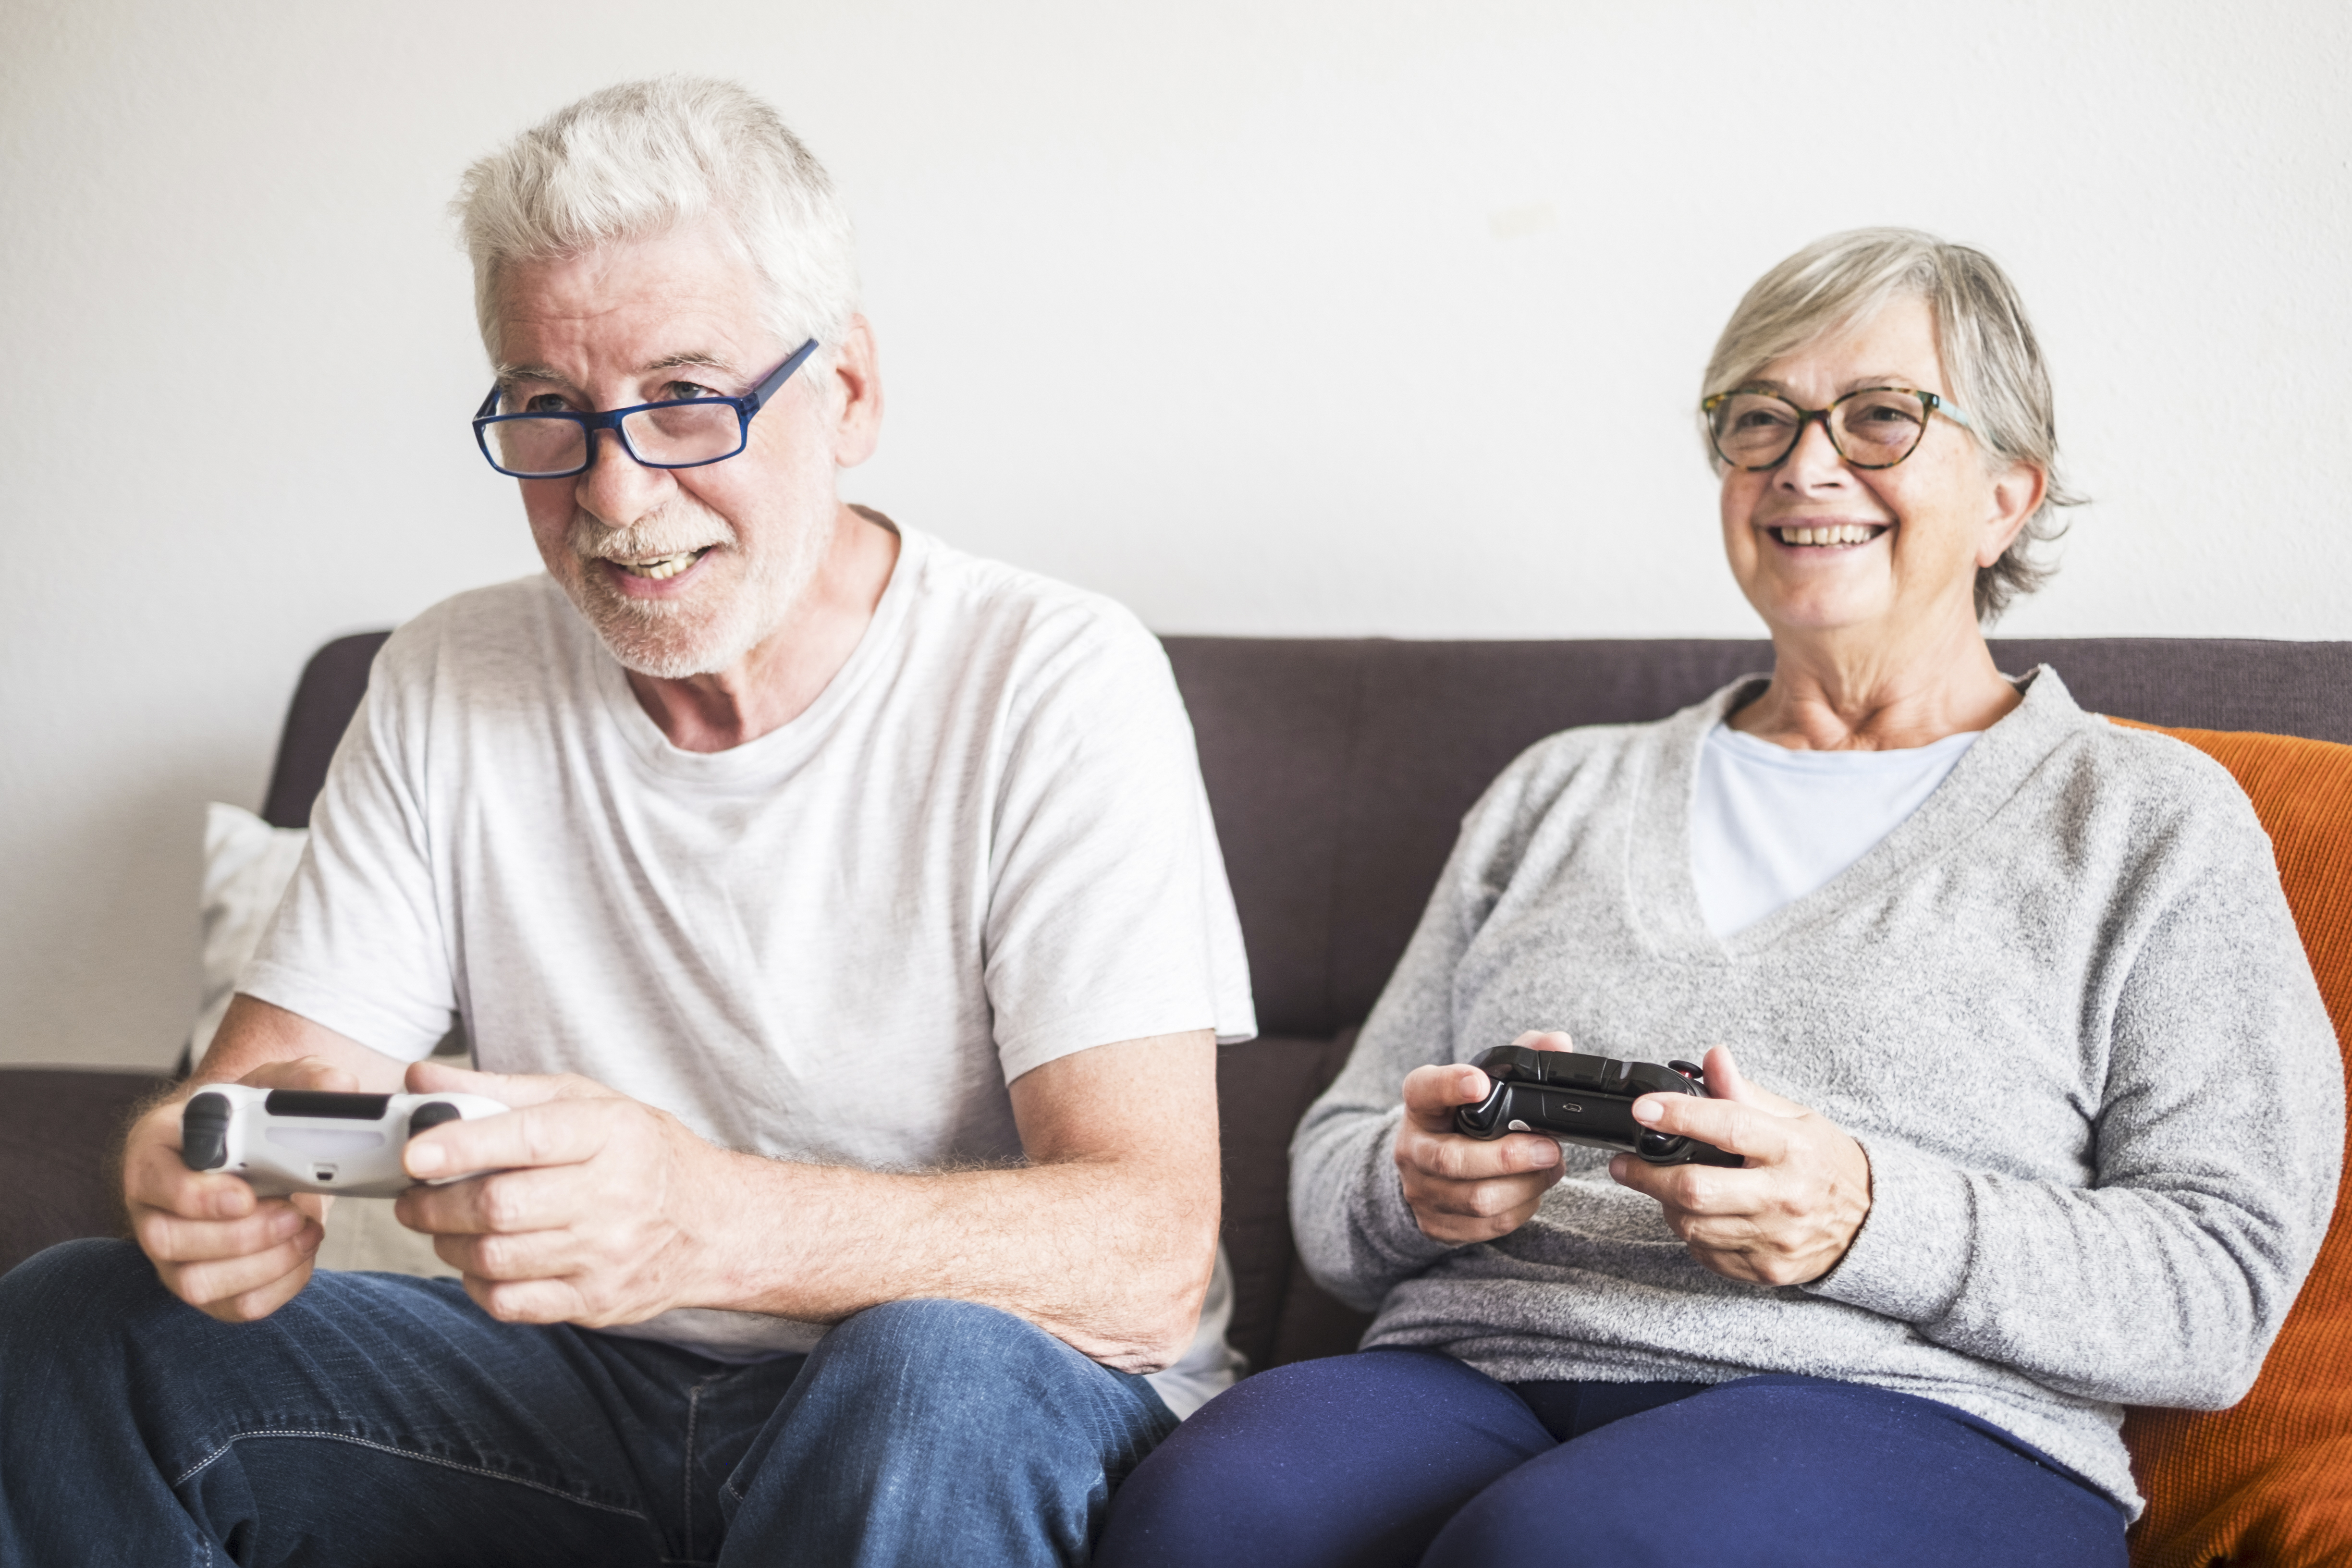 Older People Playing More Video Games During the Pandemic Than Ever